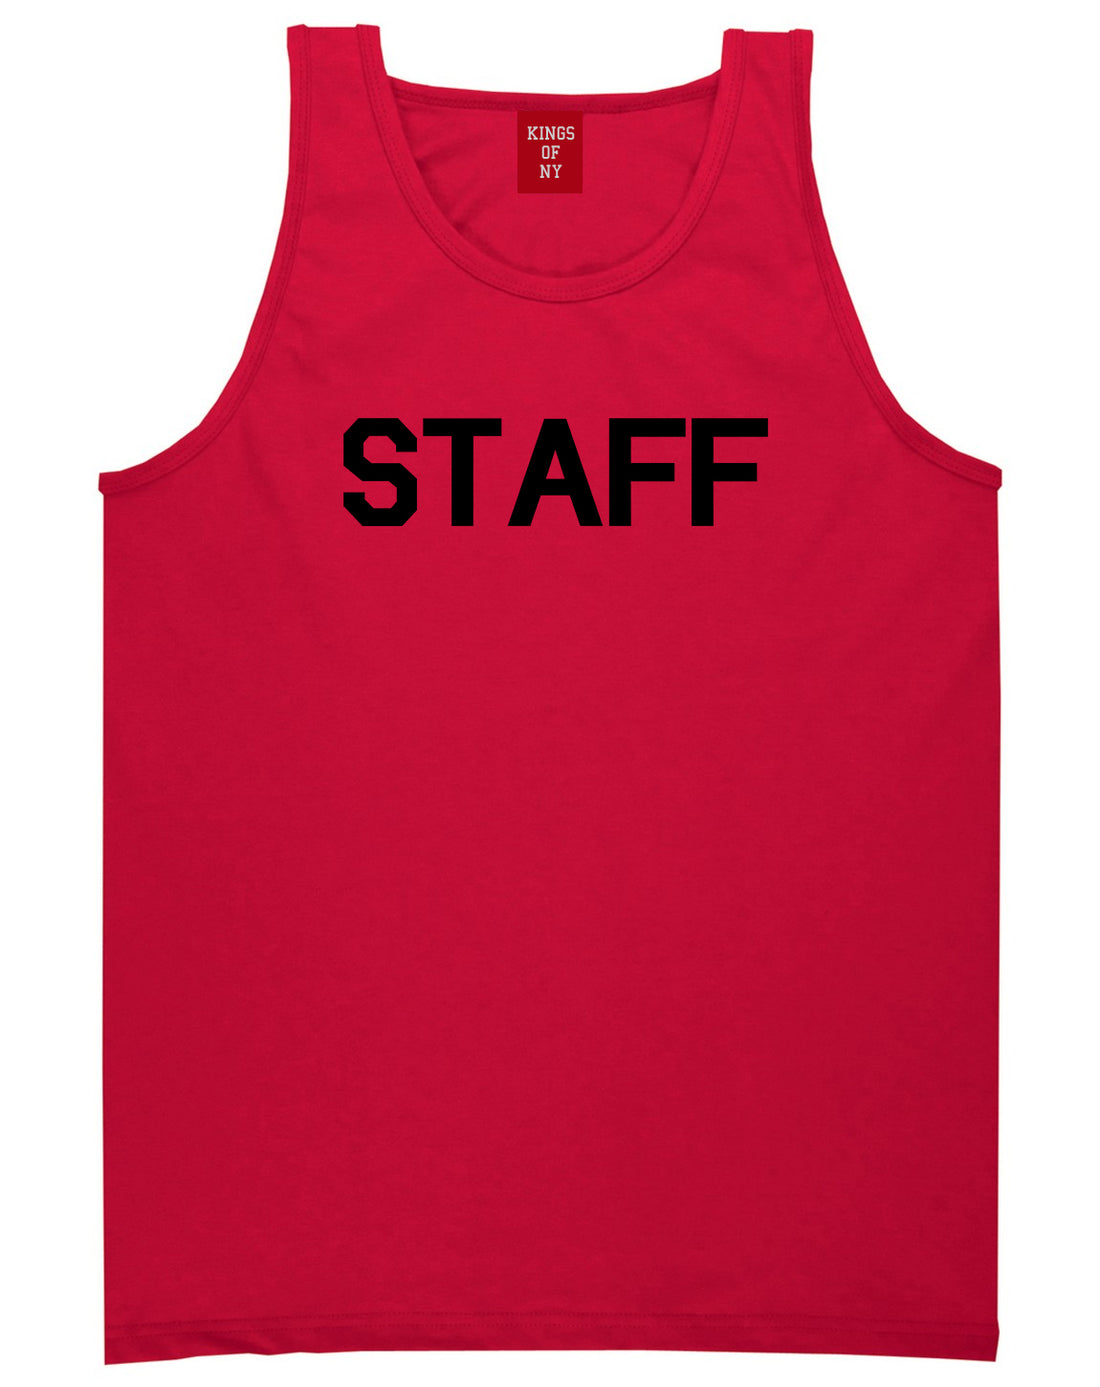 Staff Club Concert Event Mens Red Tank Top Shirt by KINGS OF NY